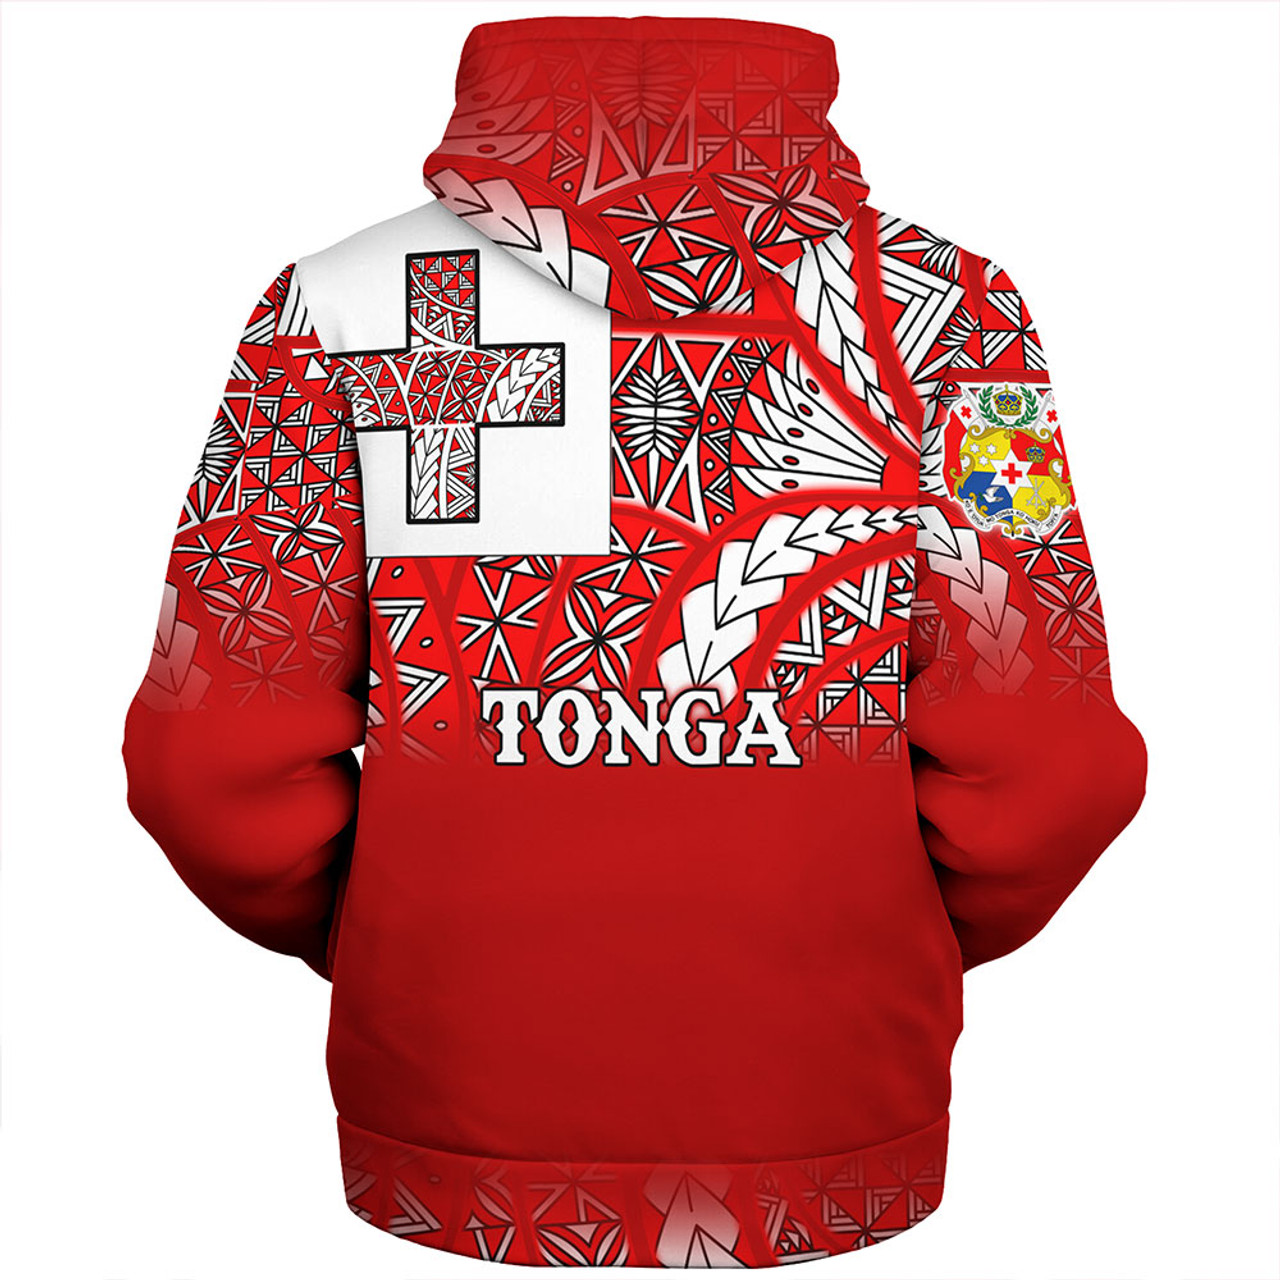 Tonga Sherpa Hoodie - Tonga Flag Color With Traditional Patterns